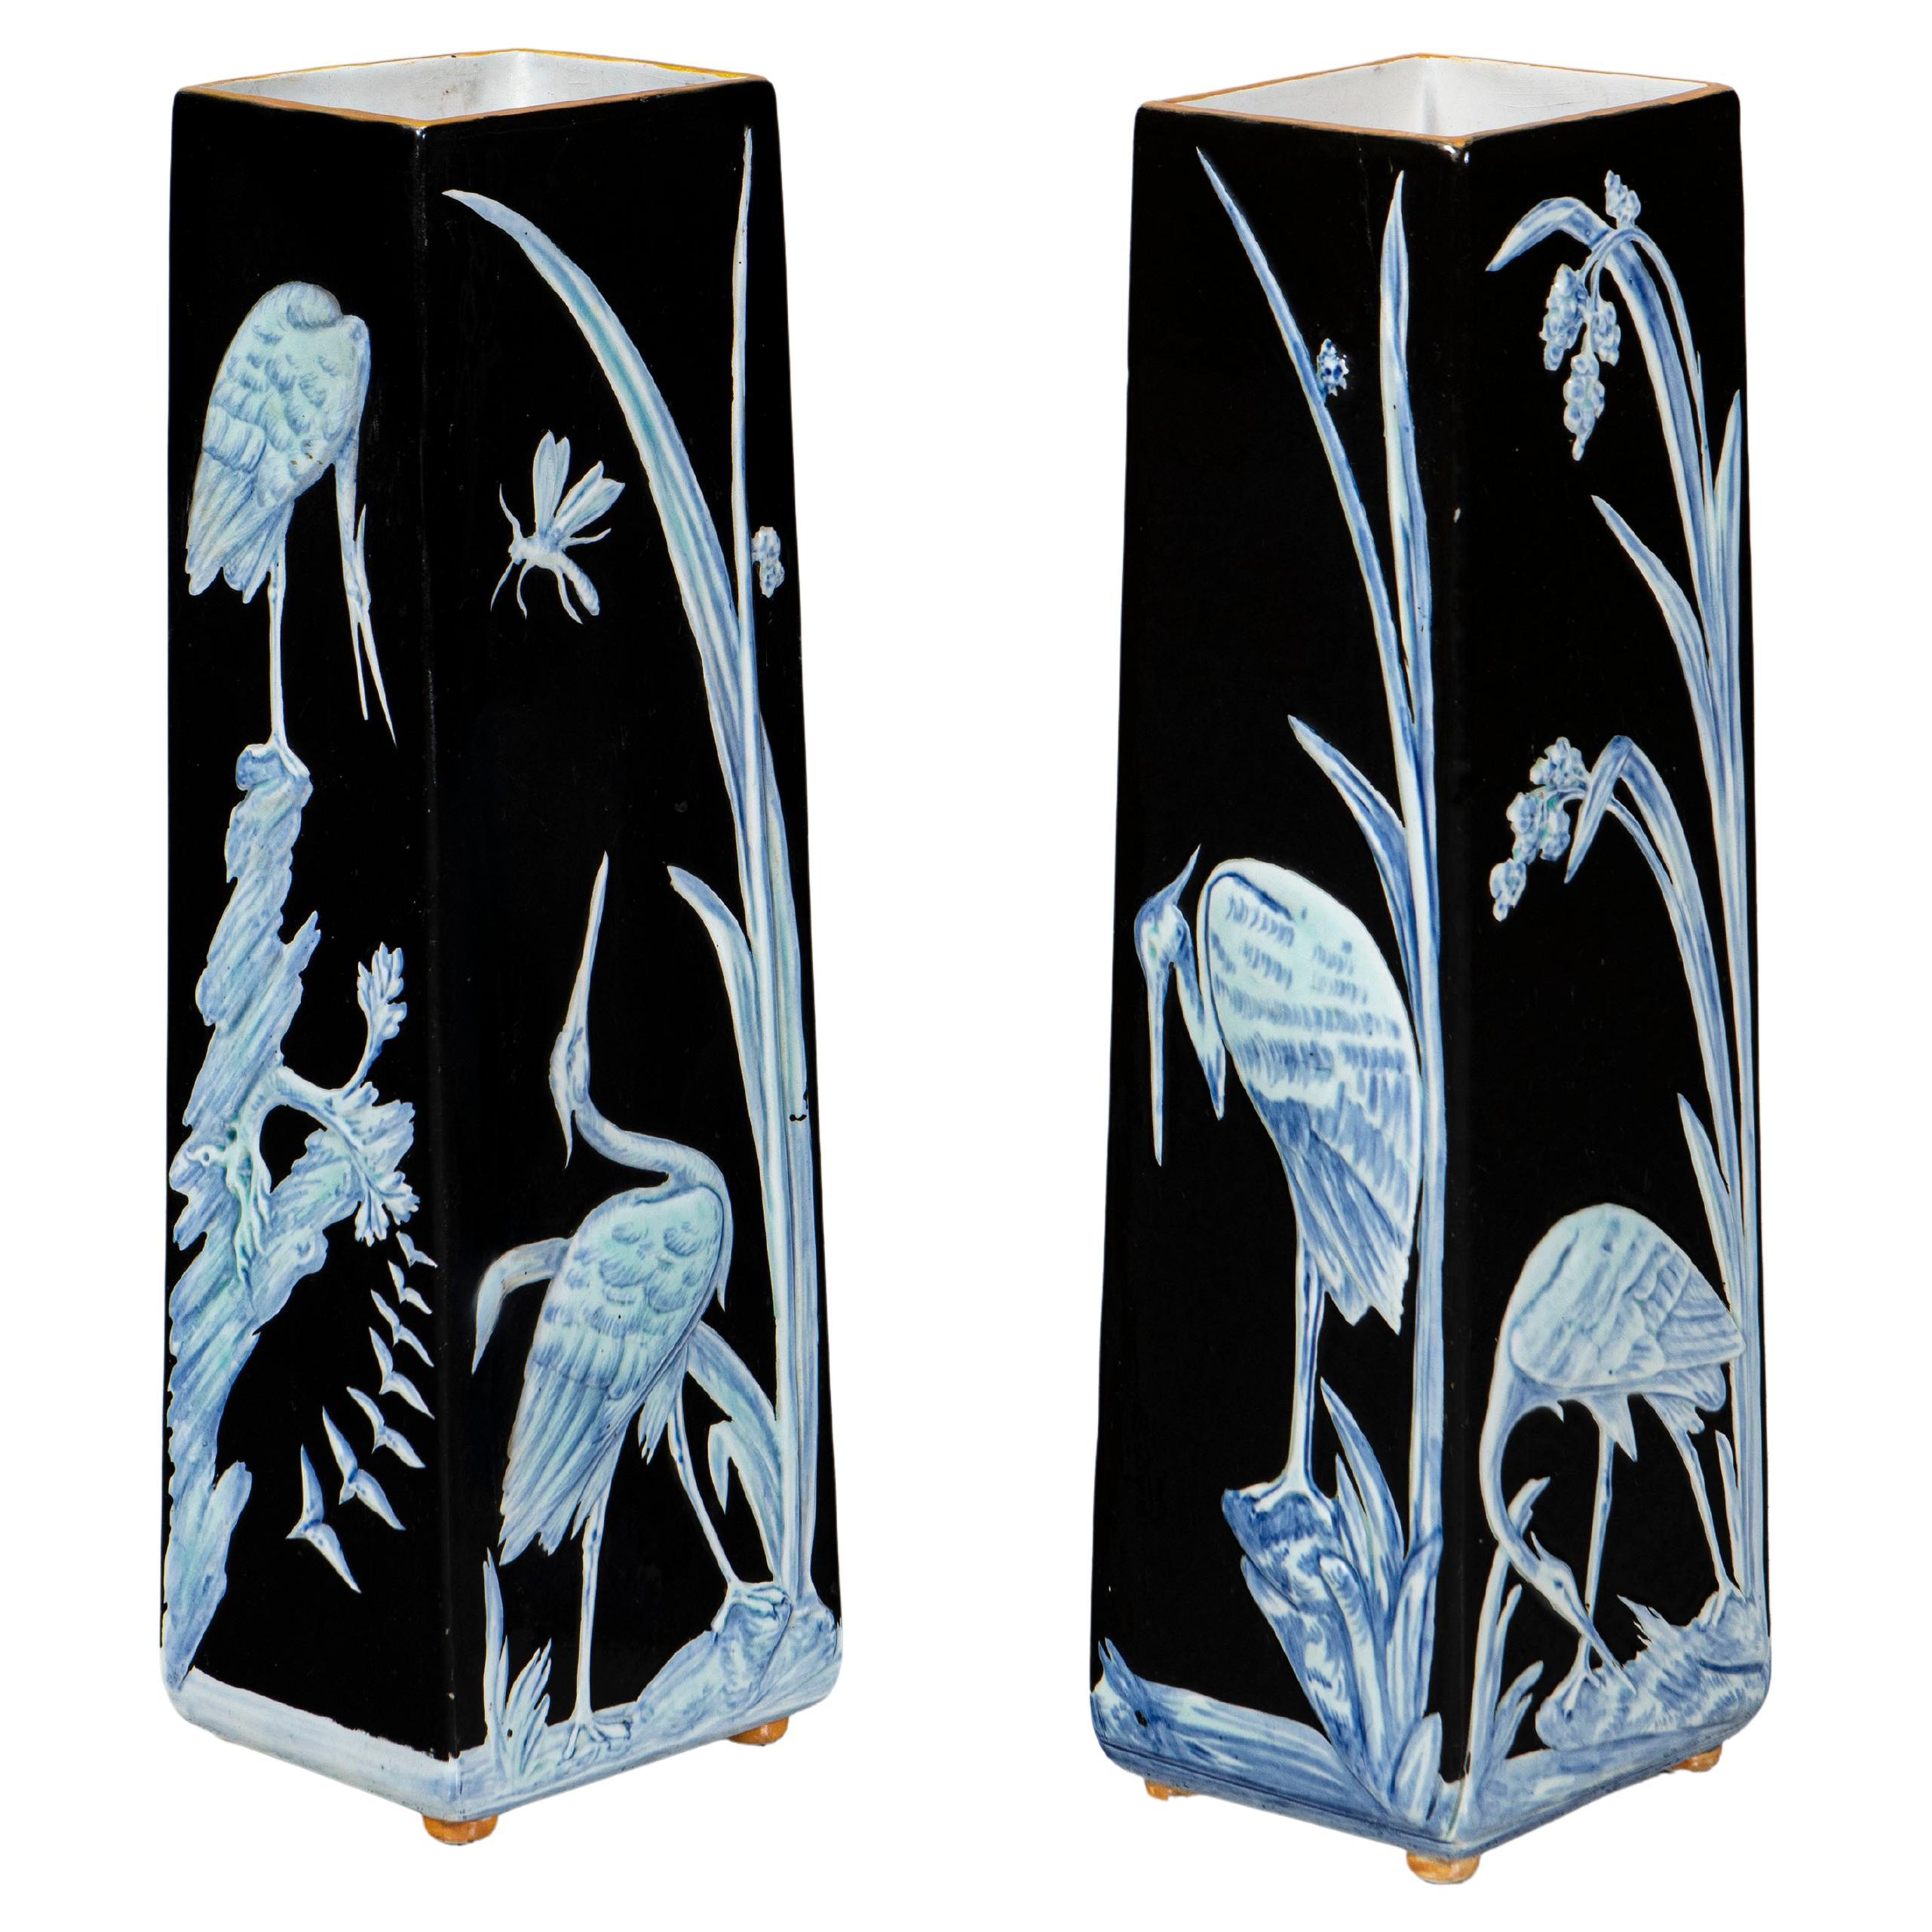 Pair of Ceramic Sarreguemines Vases with Floral and Heron Design, France, 1900 For Sale